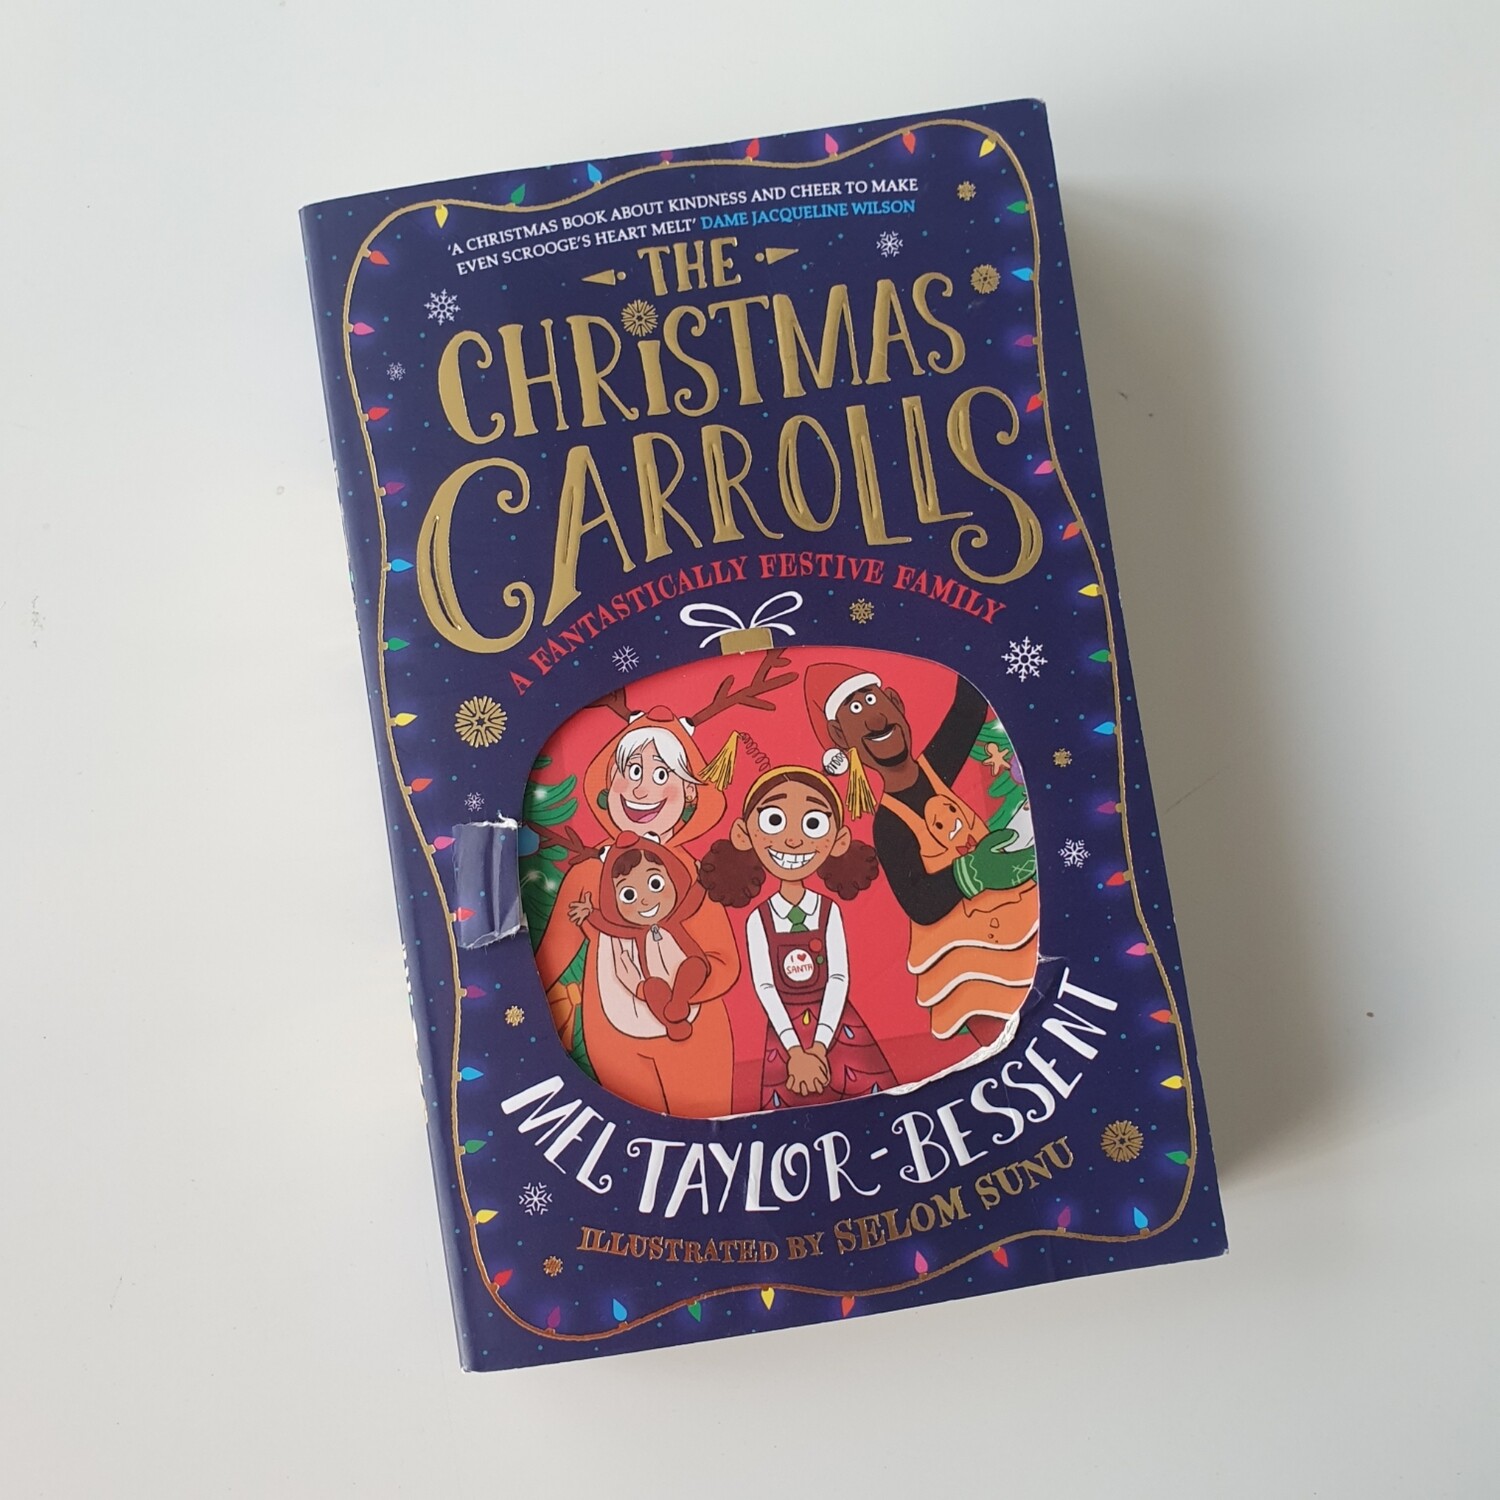 The Christmas Carrolls Notebook - made from a paperback book